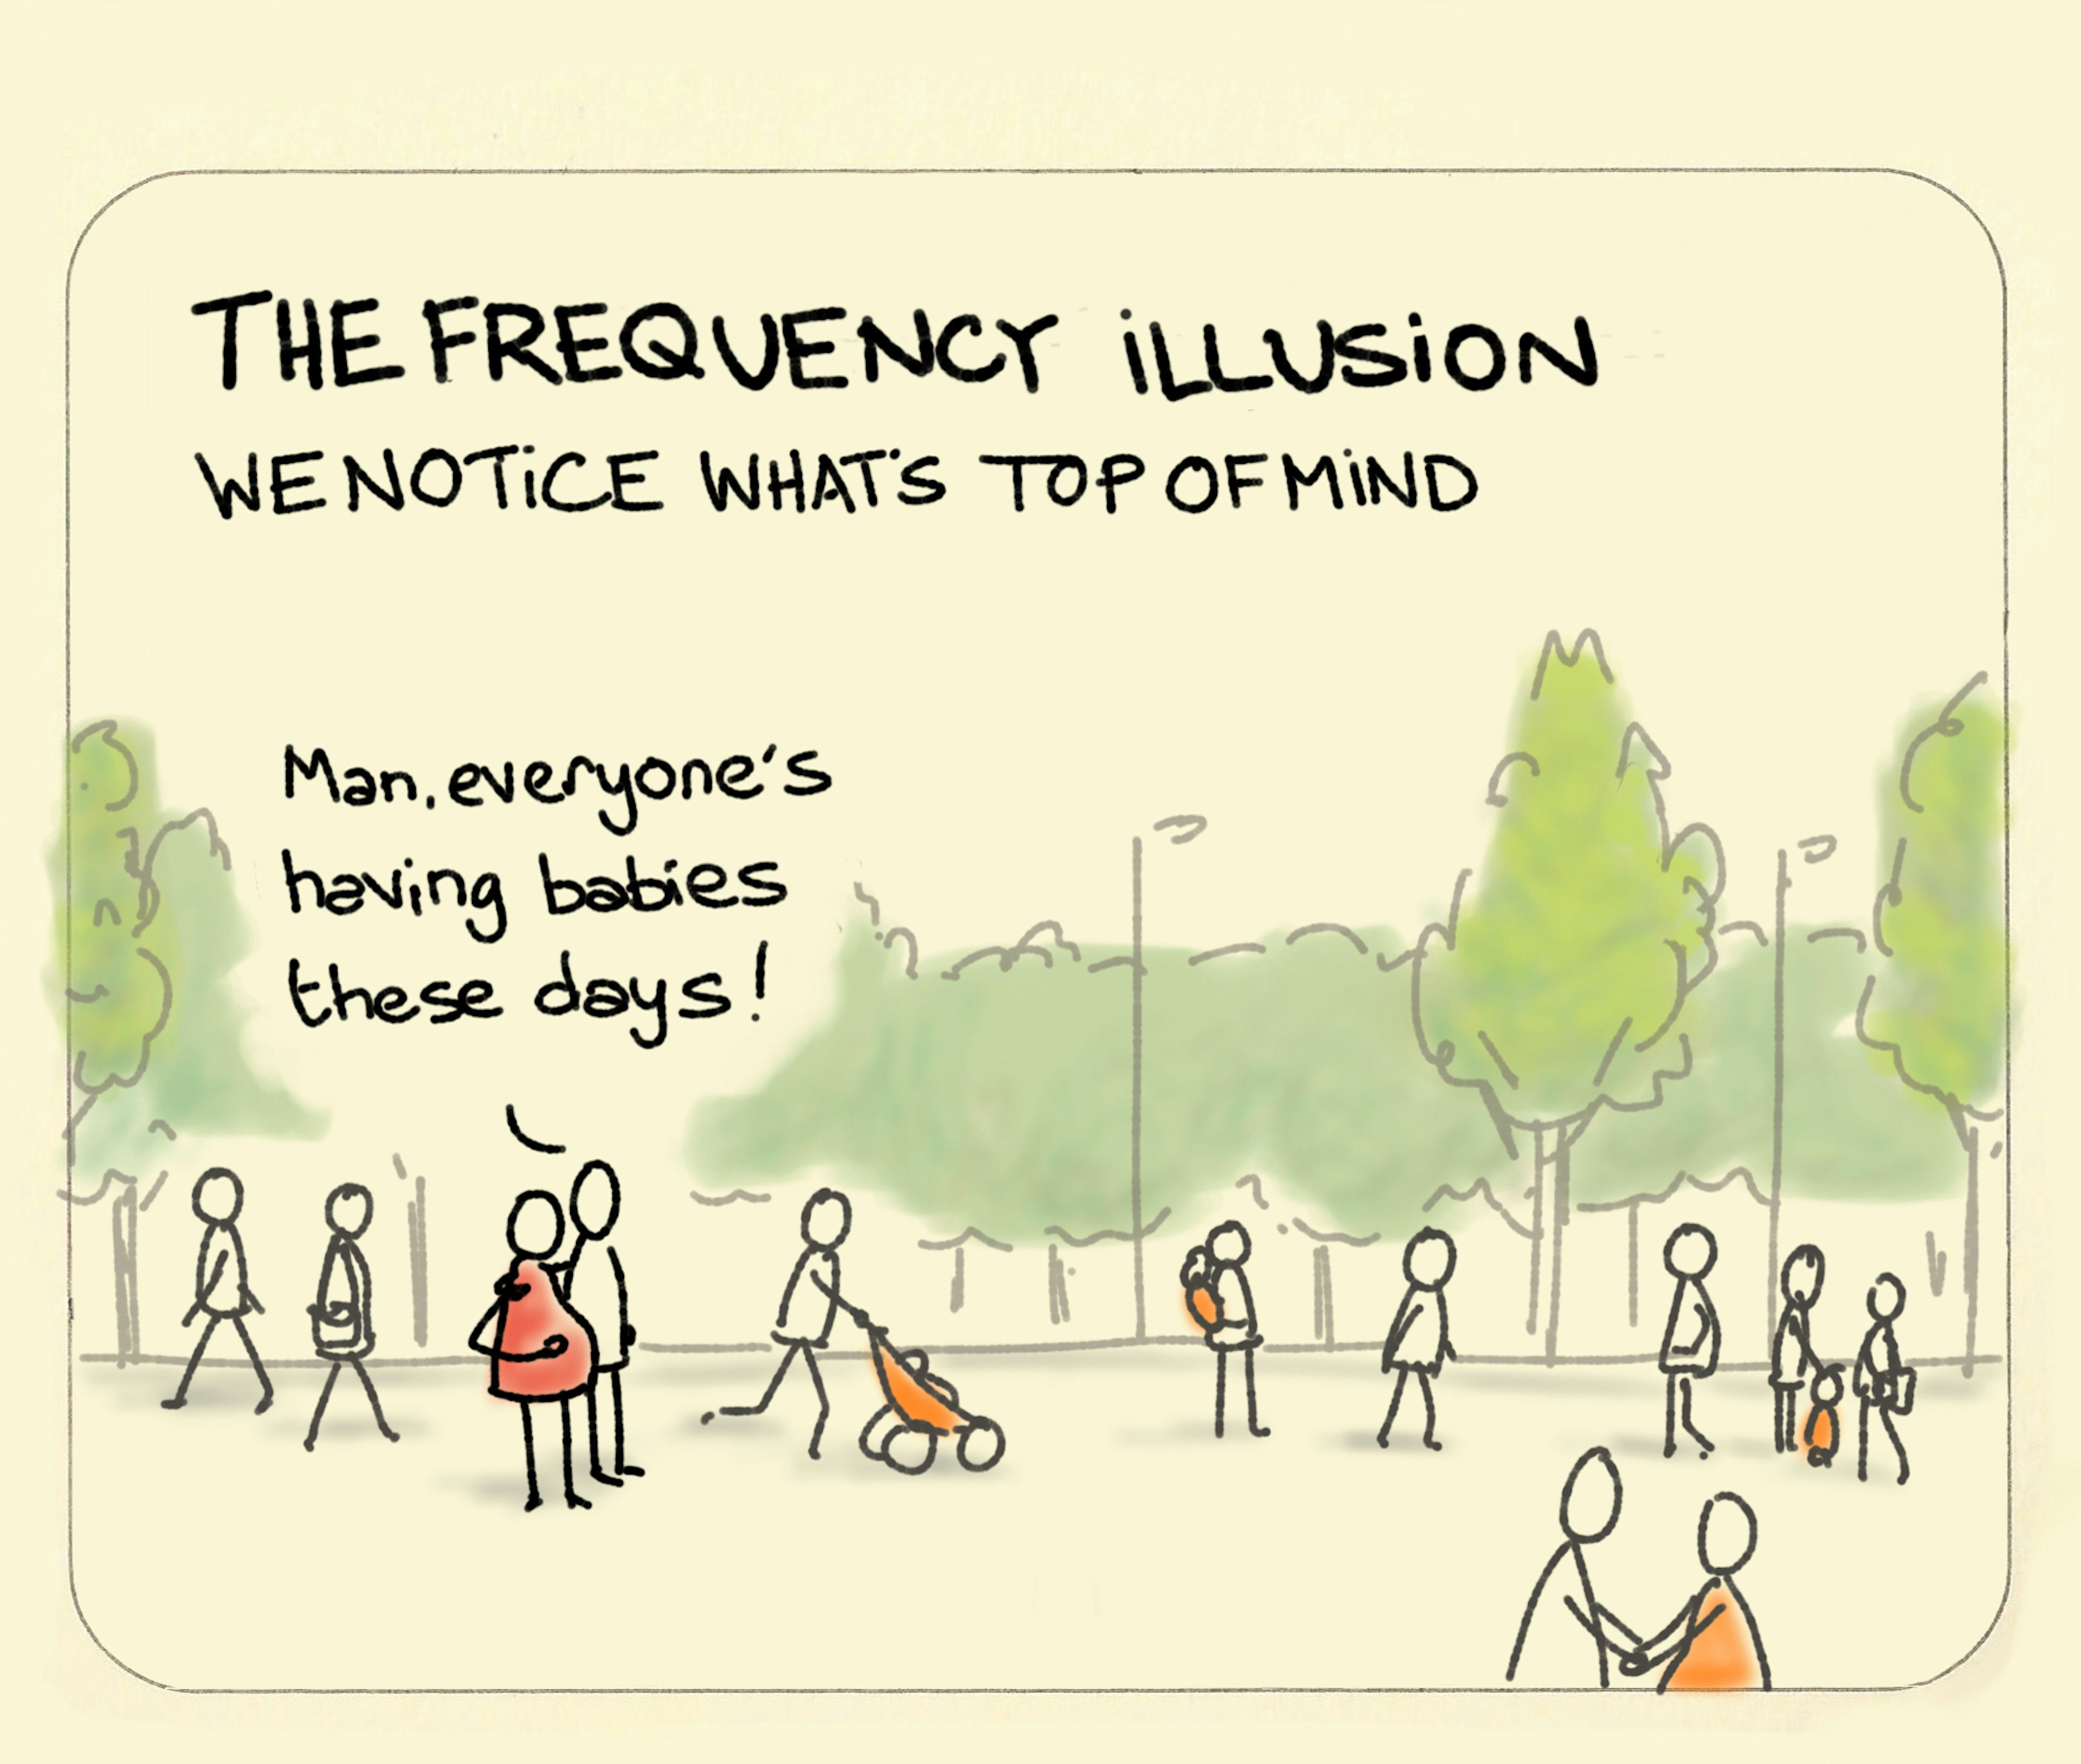 The frequency illusion: we notice what’s top of mind - Sketchplanations